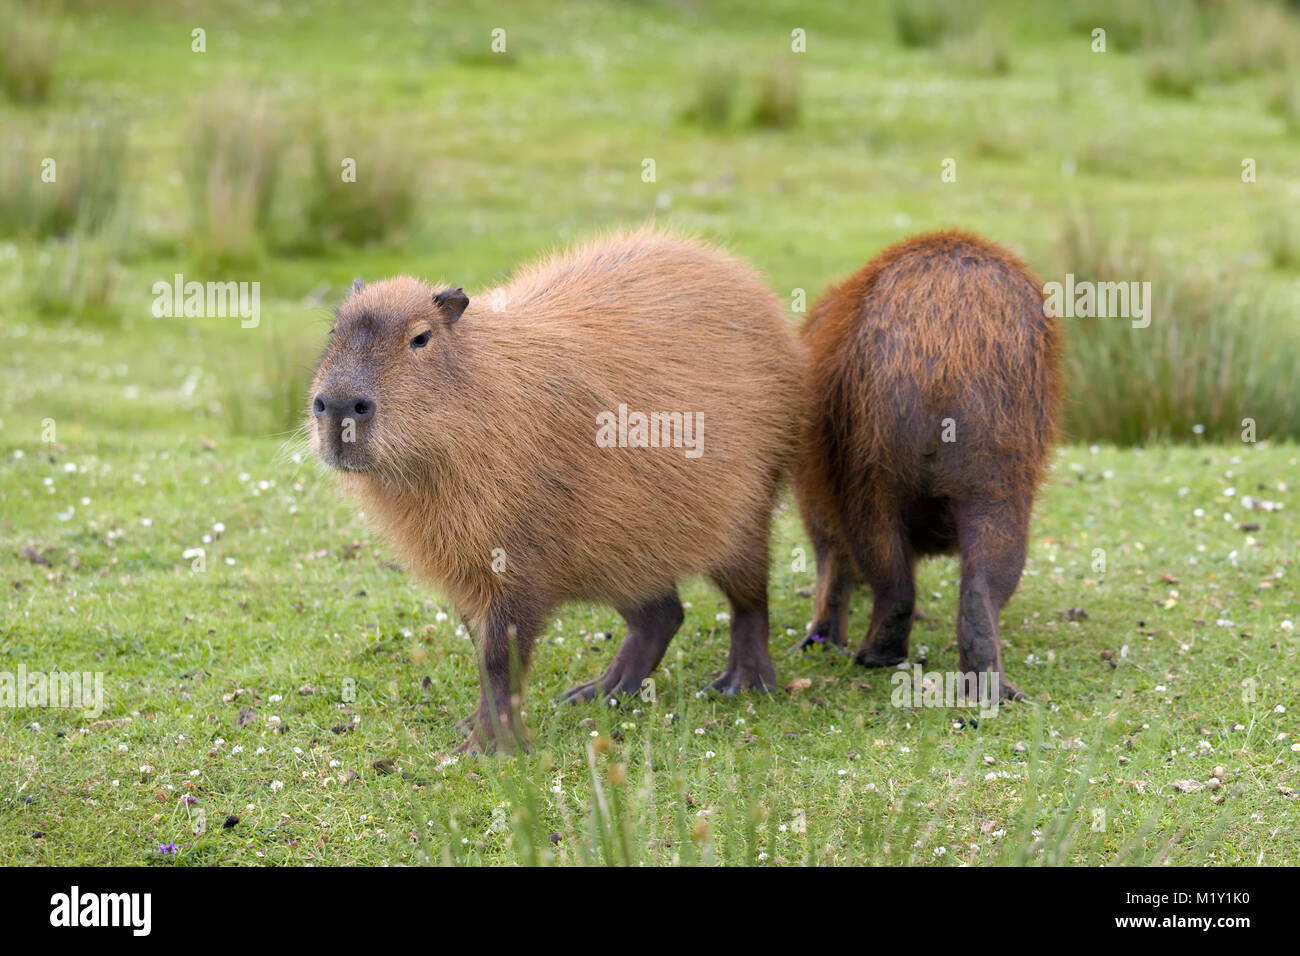 South American Capybara or hydrochaeris is the largest rodent in the world Stock Photo